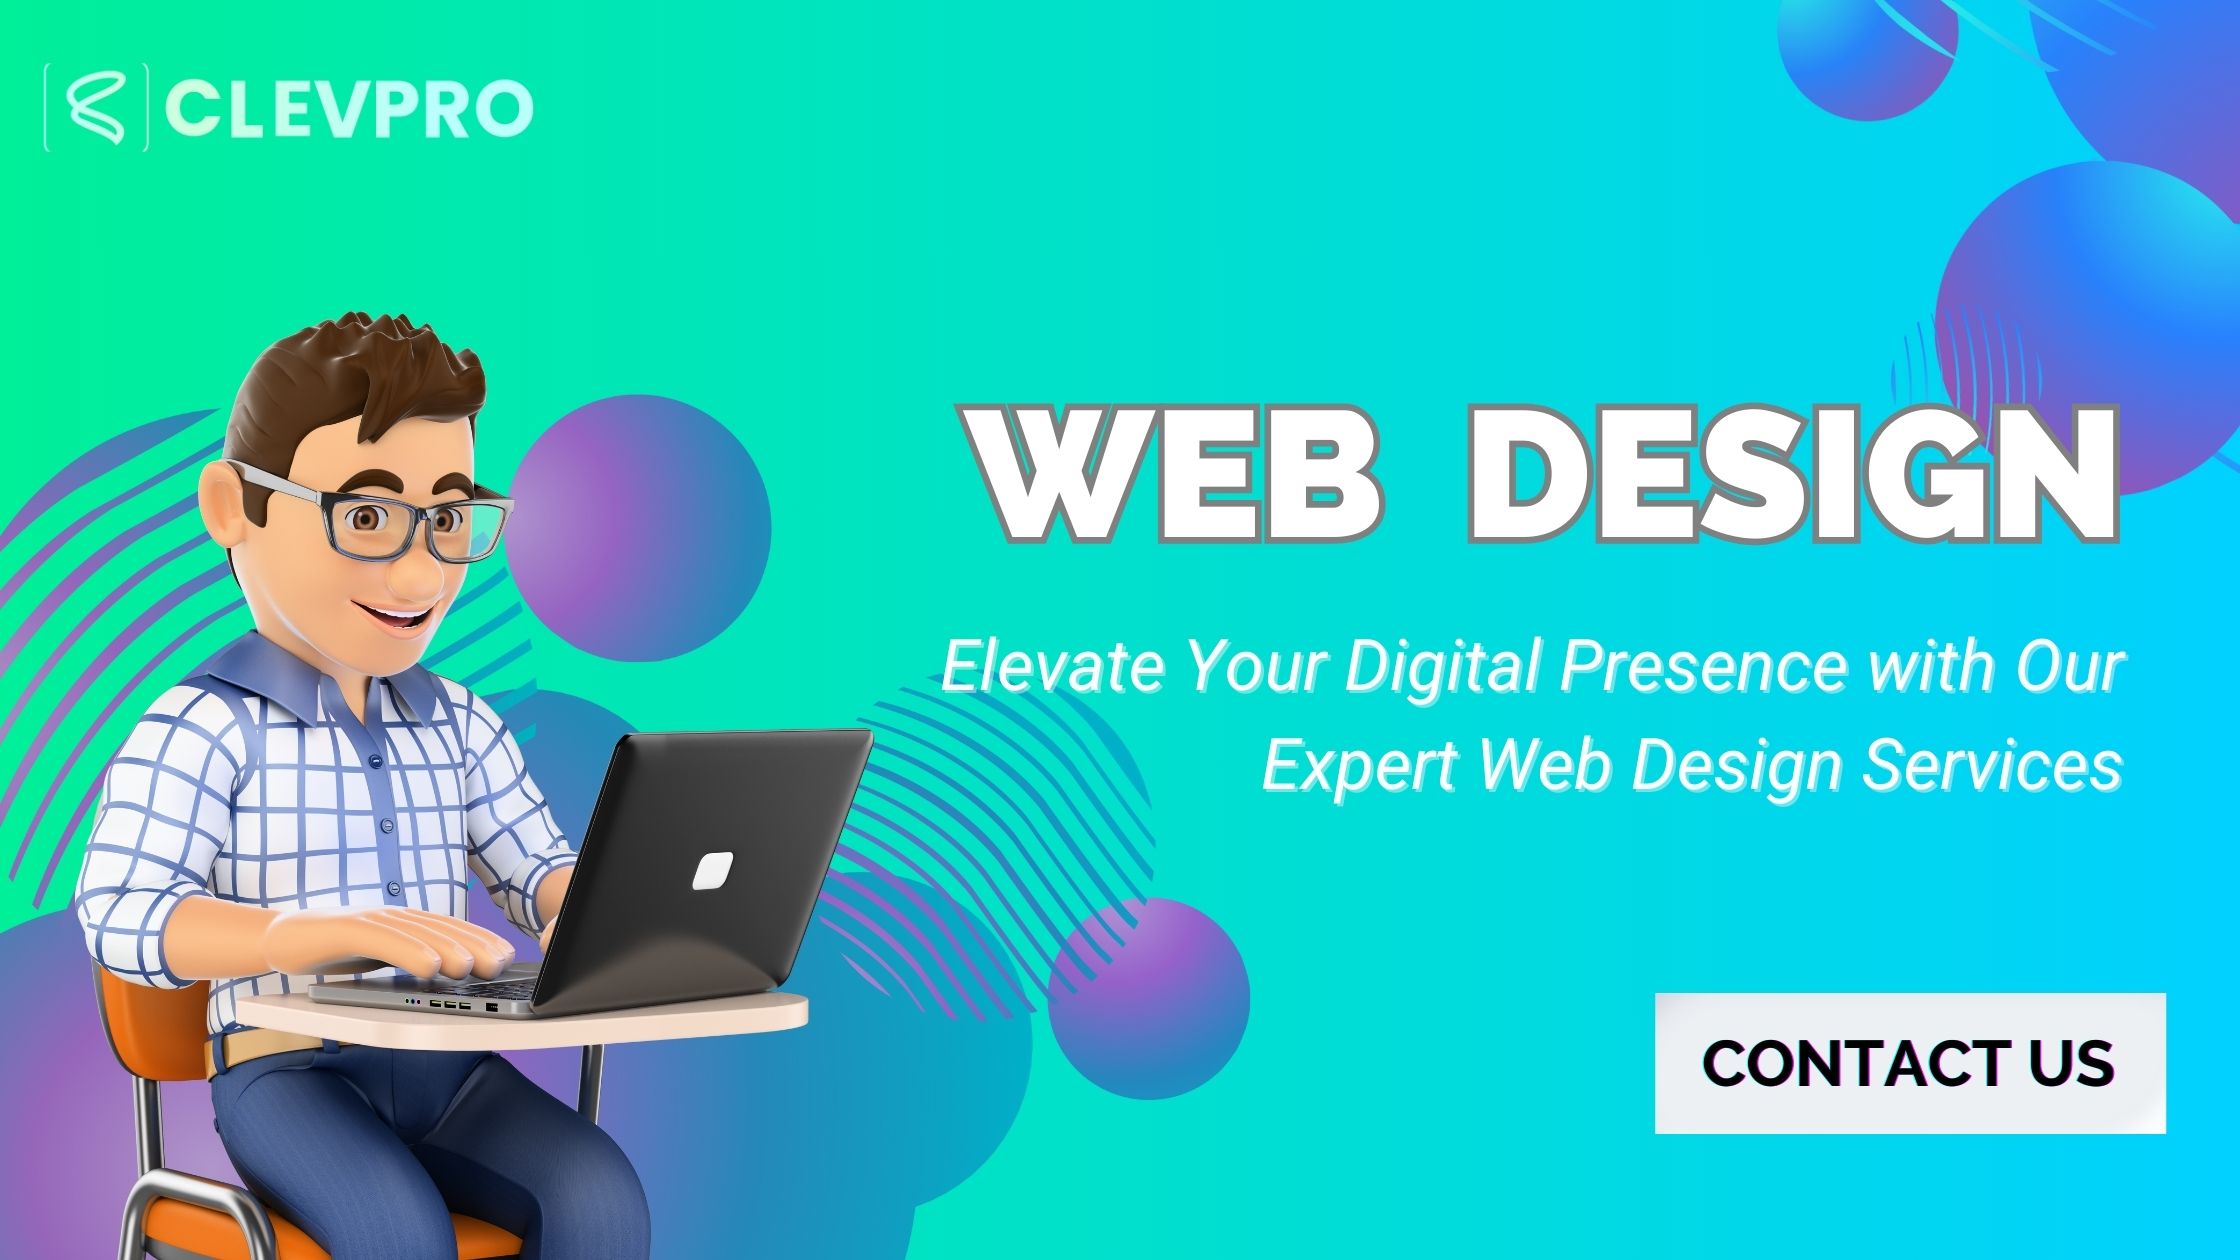 Elevate Your Digital Presence with Our Expert Web Design Services